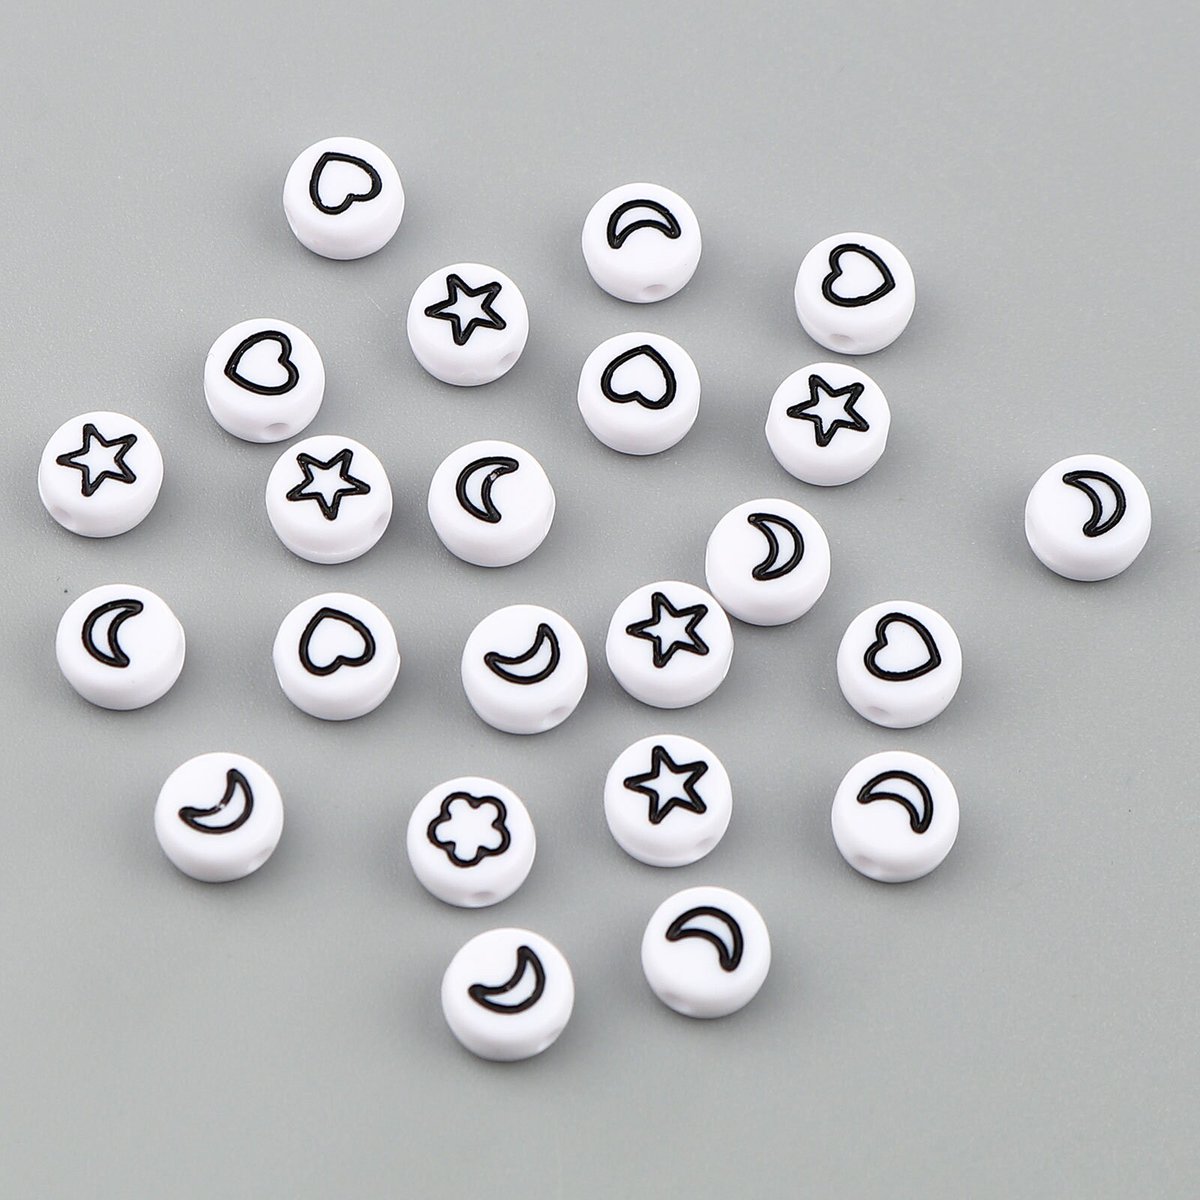 500 7mm Black and White Star Beads, Heart Beads, Moon Beads, Mixed Beads tuppu.net/acbb4ecf #Etsy #craft supplies #Beads #charms #VickysJewelrySupply #Jewelrysupplies #handmadejewelry #letterbeads #stampingsupplies #cabochons #FlowerBeads